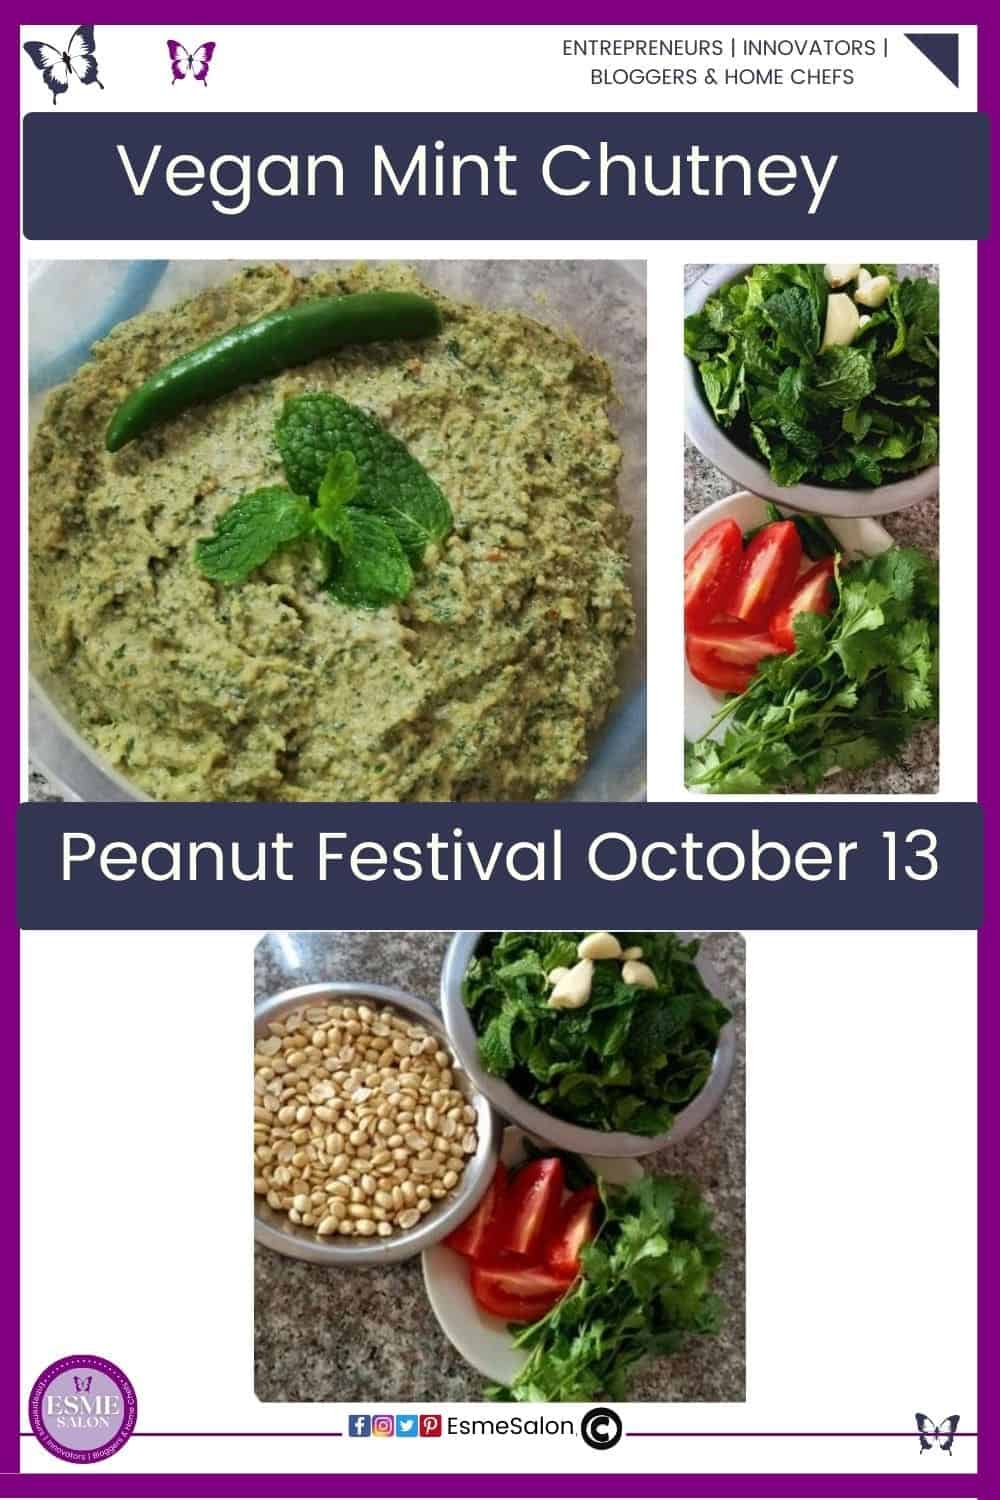 an image of a plastic contained with Vegan Mint Chutney with a chili and mint sprig and ingredients with peanuts